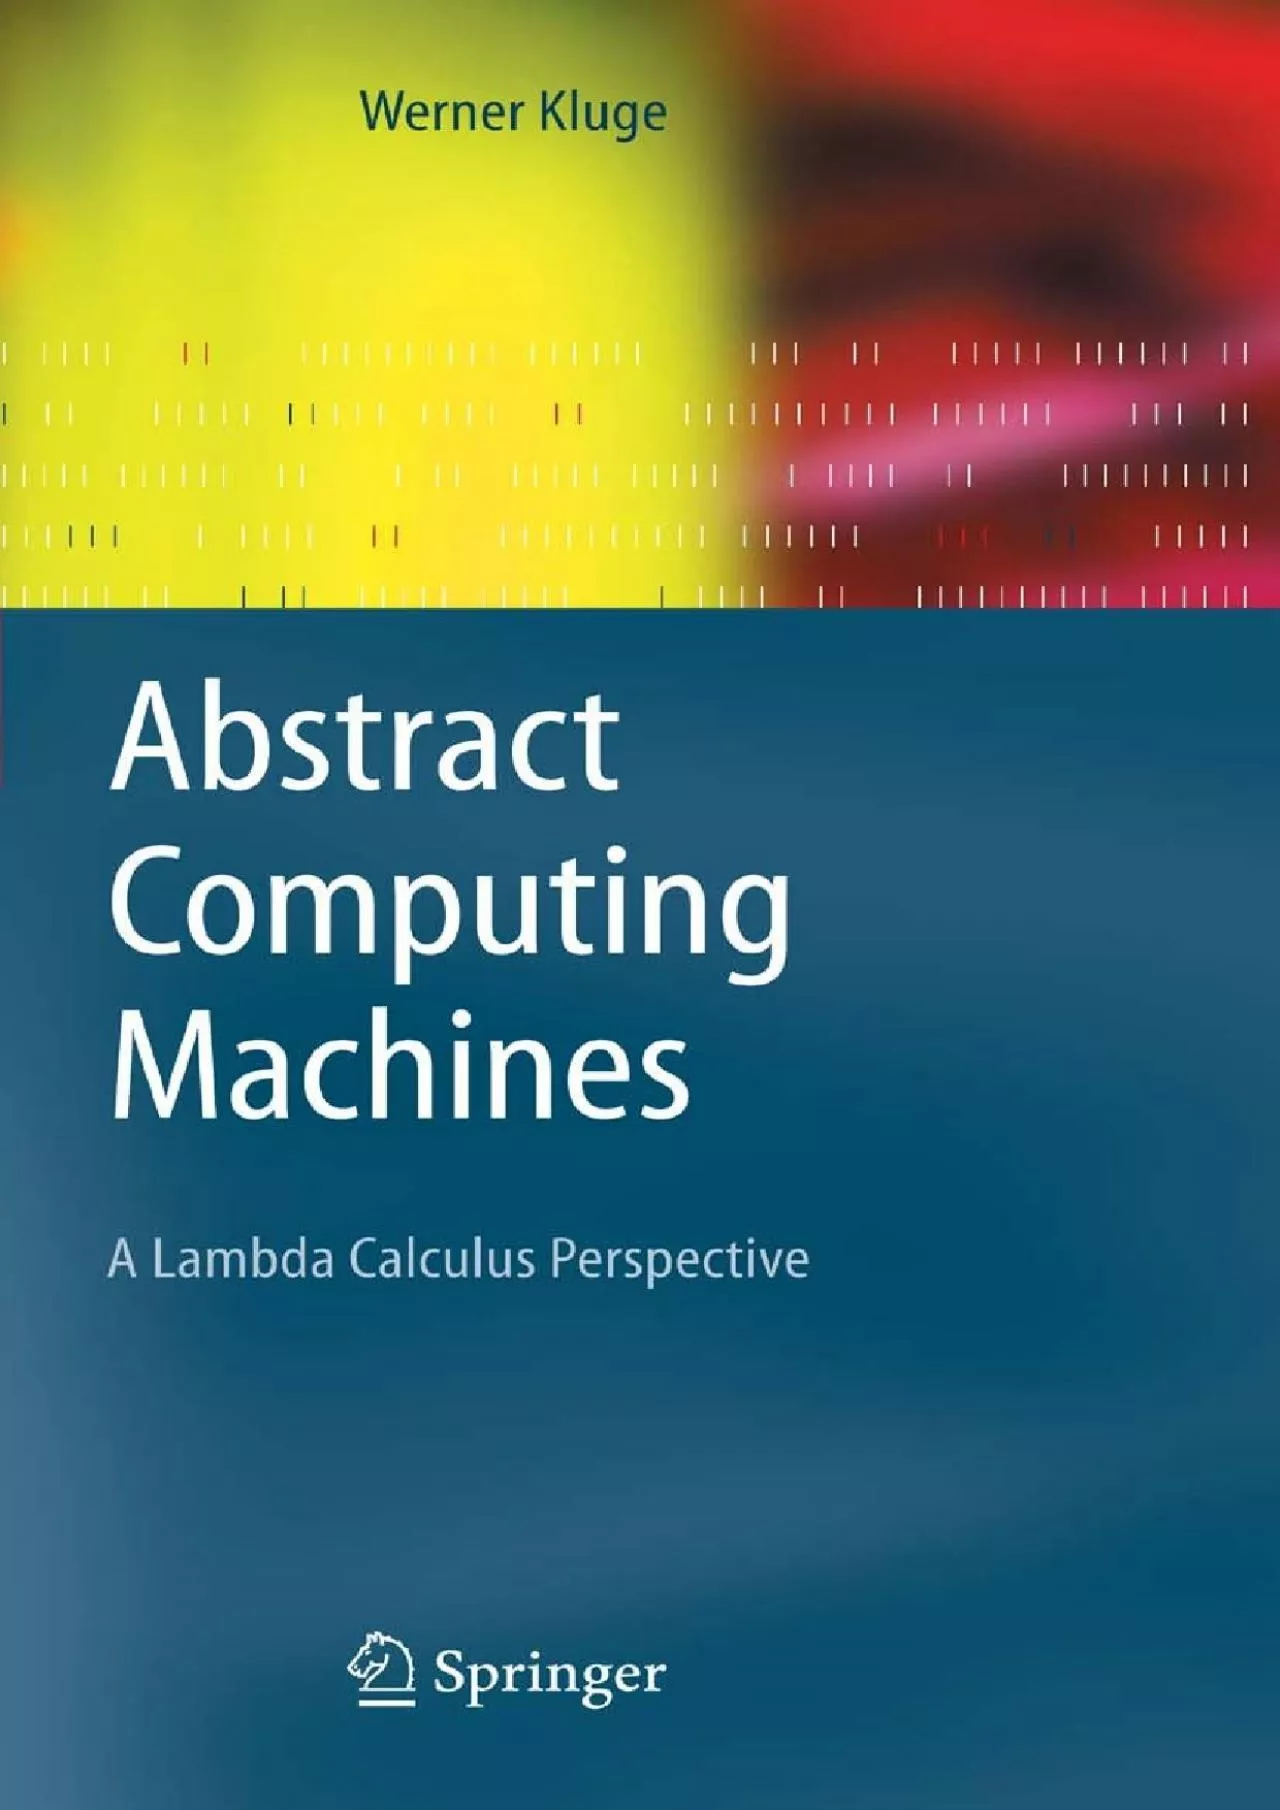 [PDF]-Abstract Computing Machines: A Lambda Calculus Perspective (Texts in Theoretical